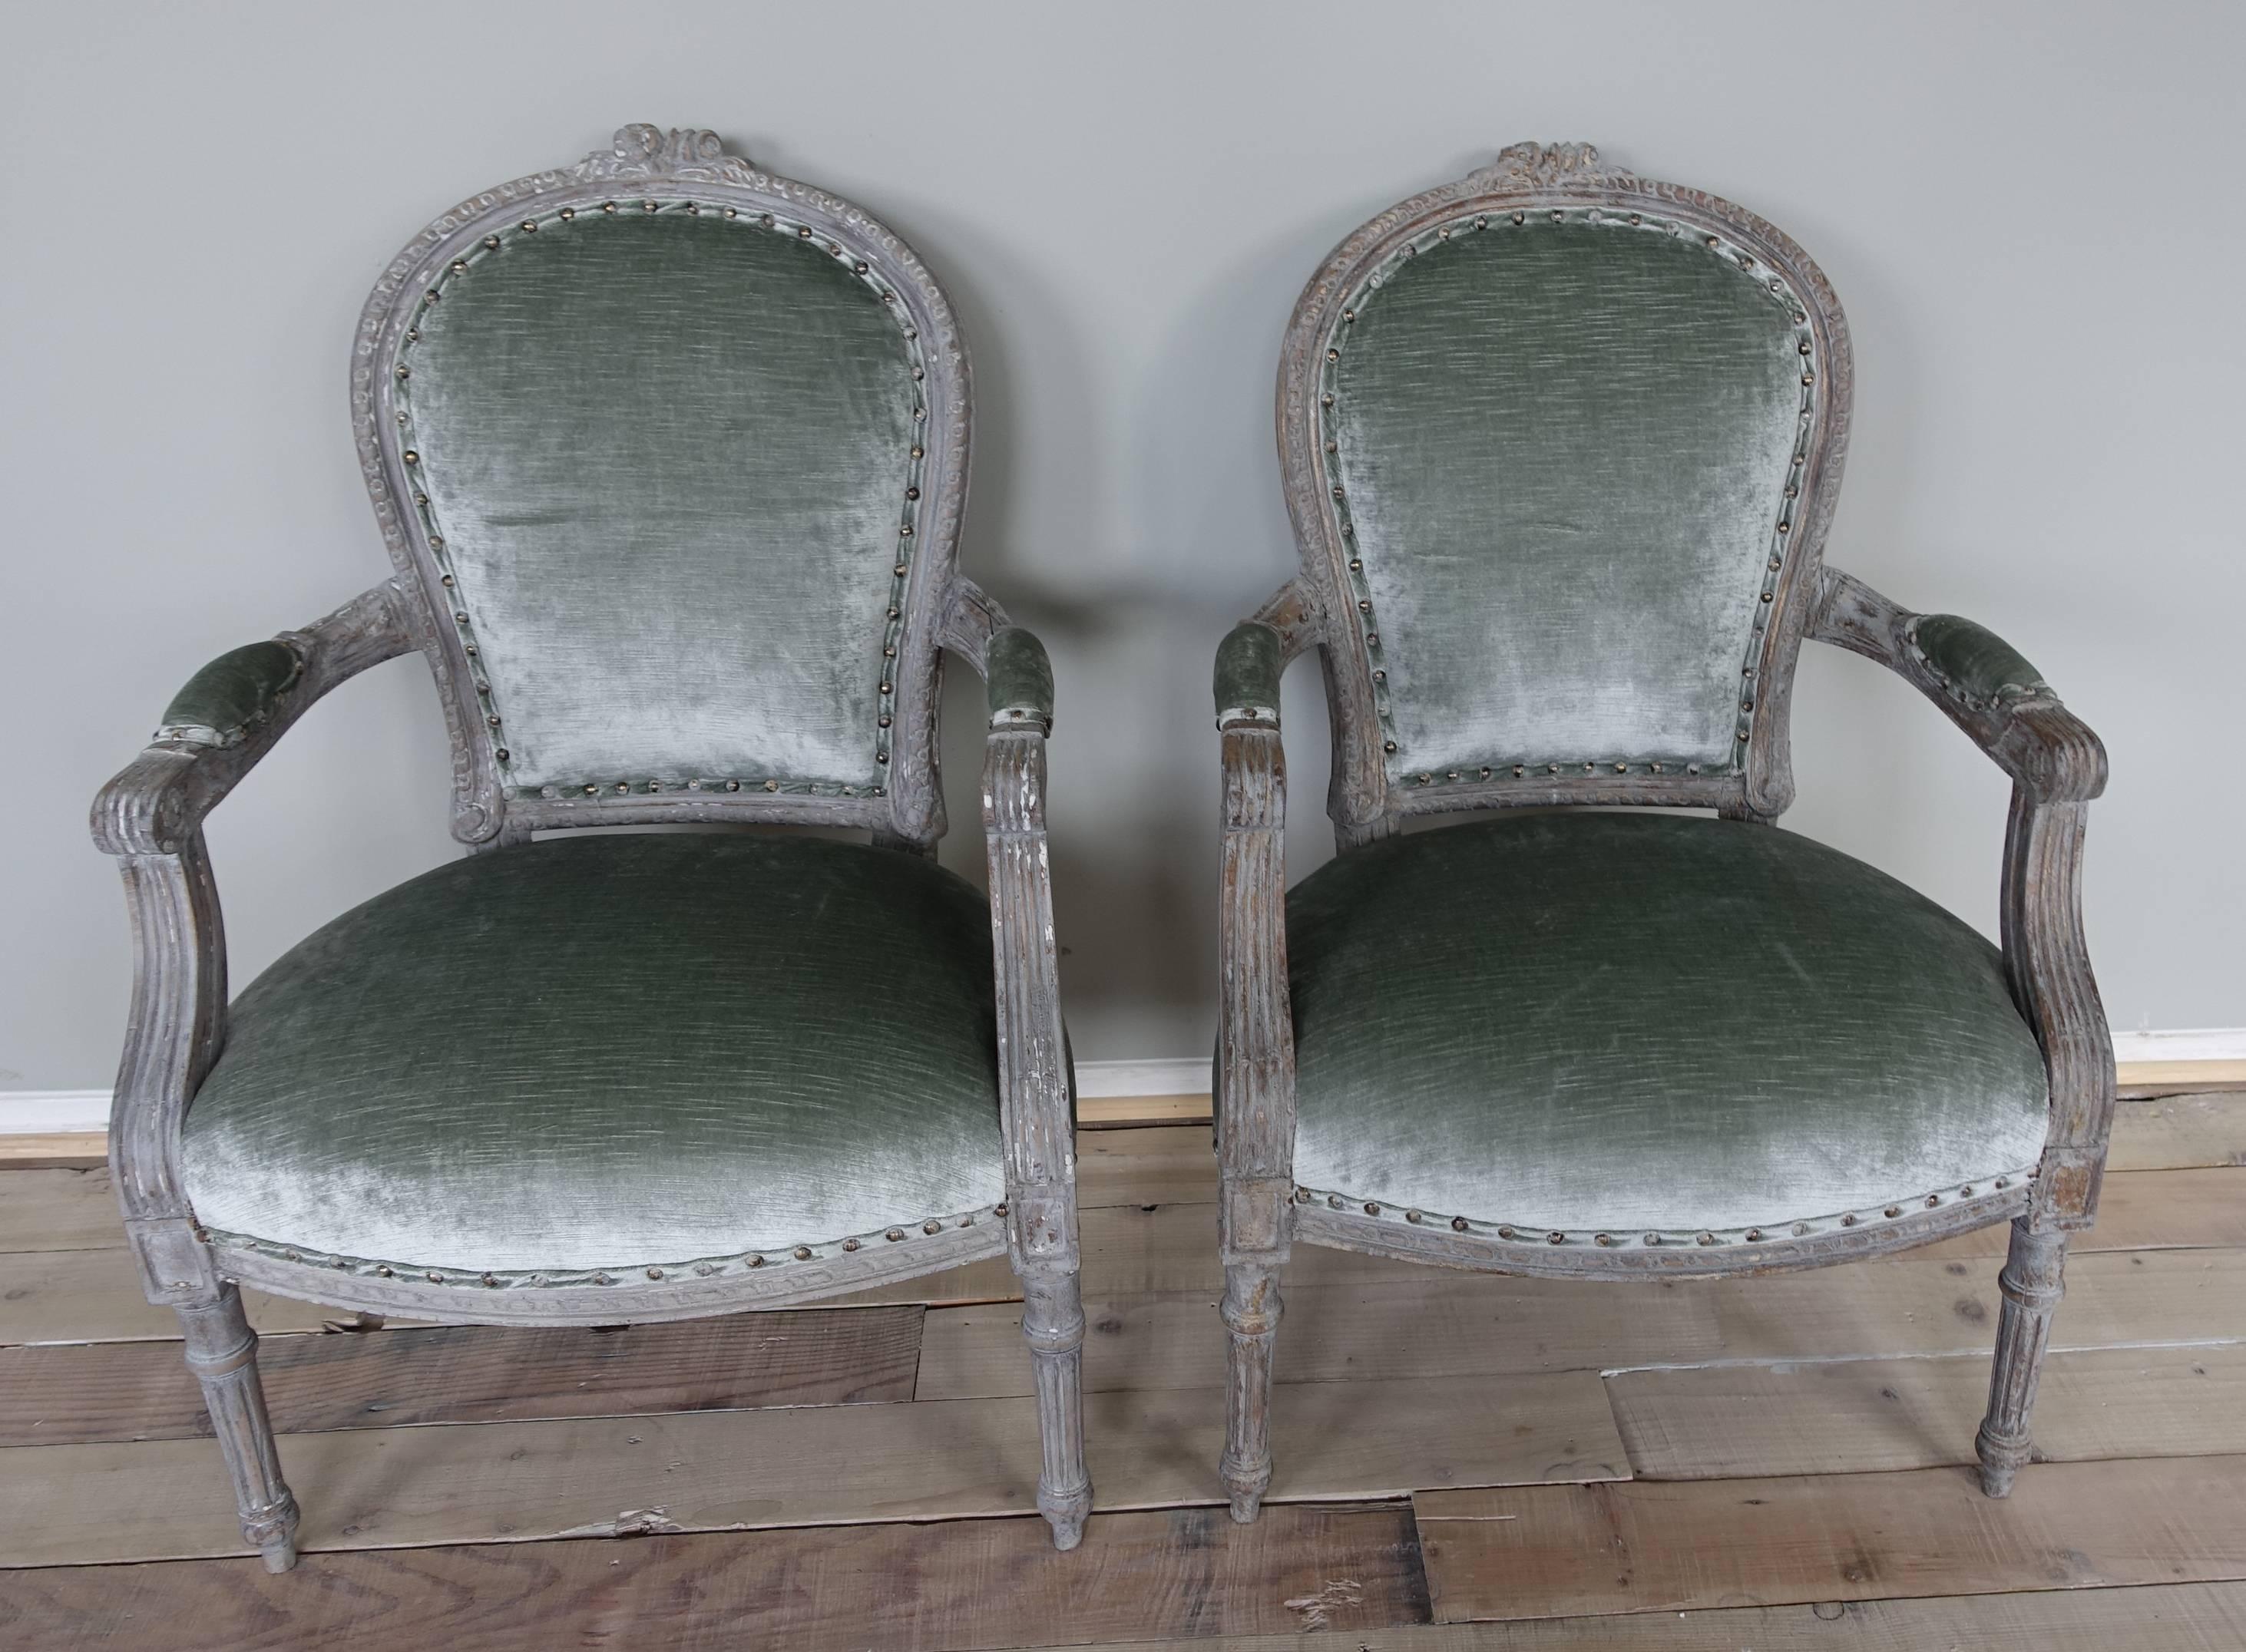 Pair of neoclassical style French painted armchairs newly upholstered in sea foam colored linen velvet with self welt and spaced nailhead trim detail. The chairs Stand on four straight fluted legs.